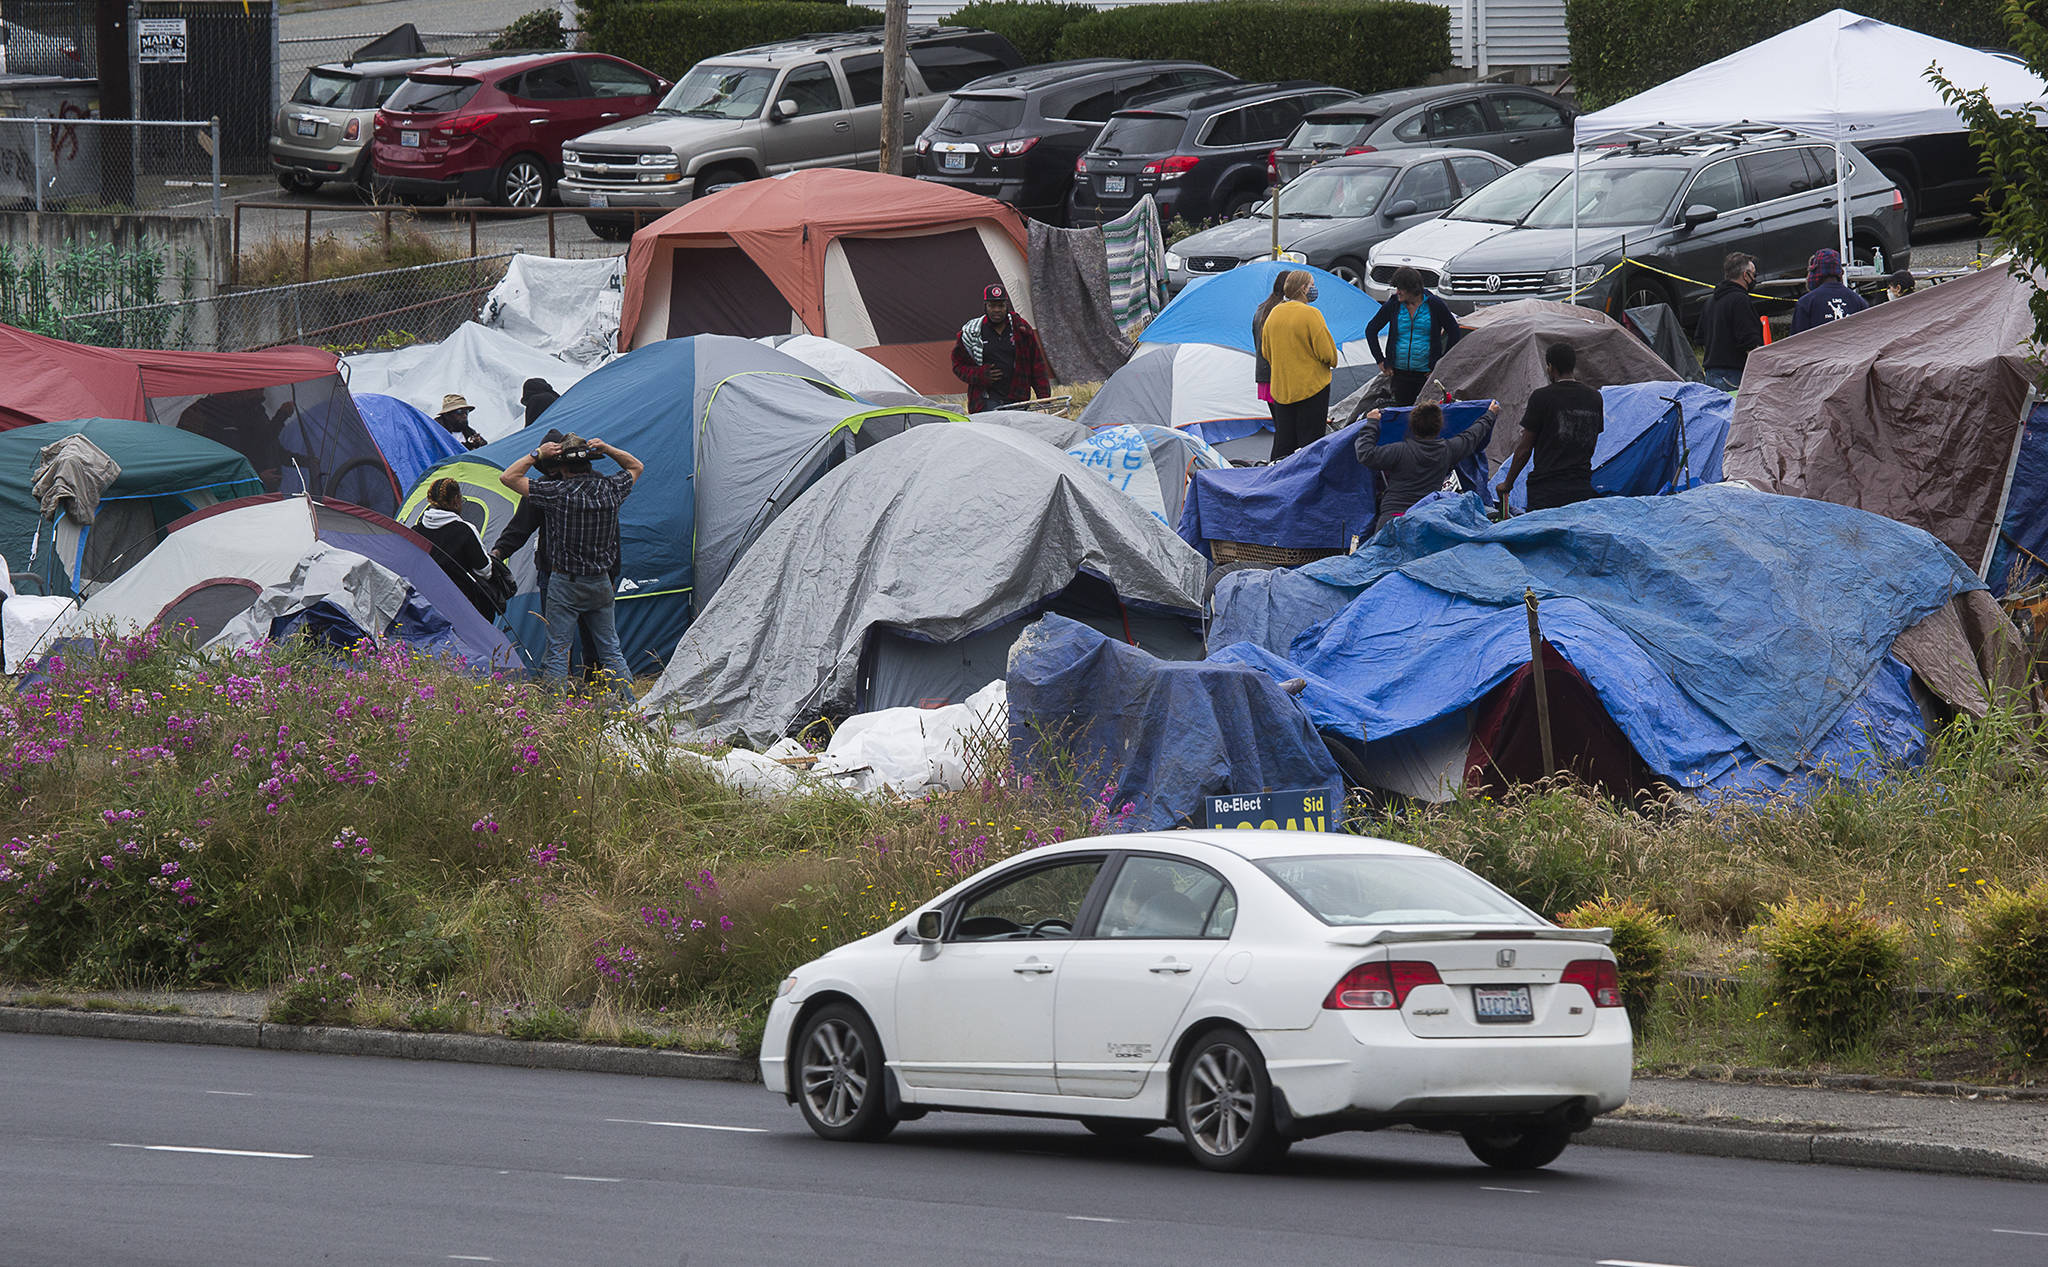 Cars drive by a homeless encampment at 3217 Rucker Ave. on Tuesday in Everett. The camp relocated from the country courthouse plaza. (Andy Bronson / The Herald)